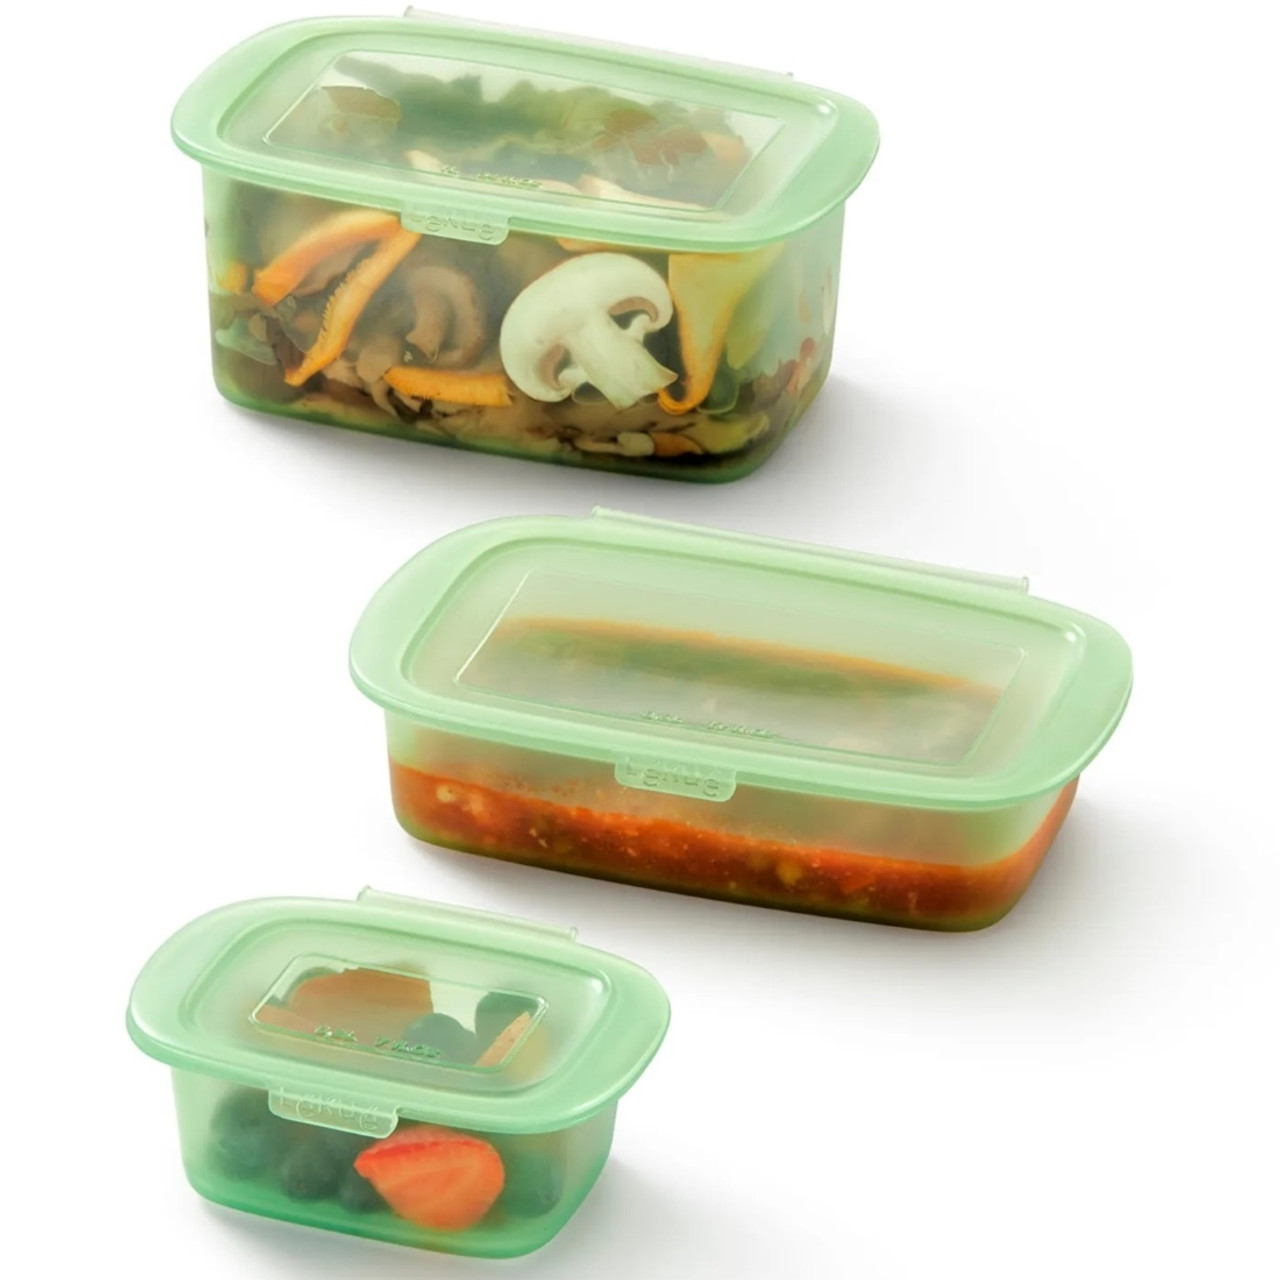 Preserve veggies, sauces, fruits and meats in reusable containers. 